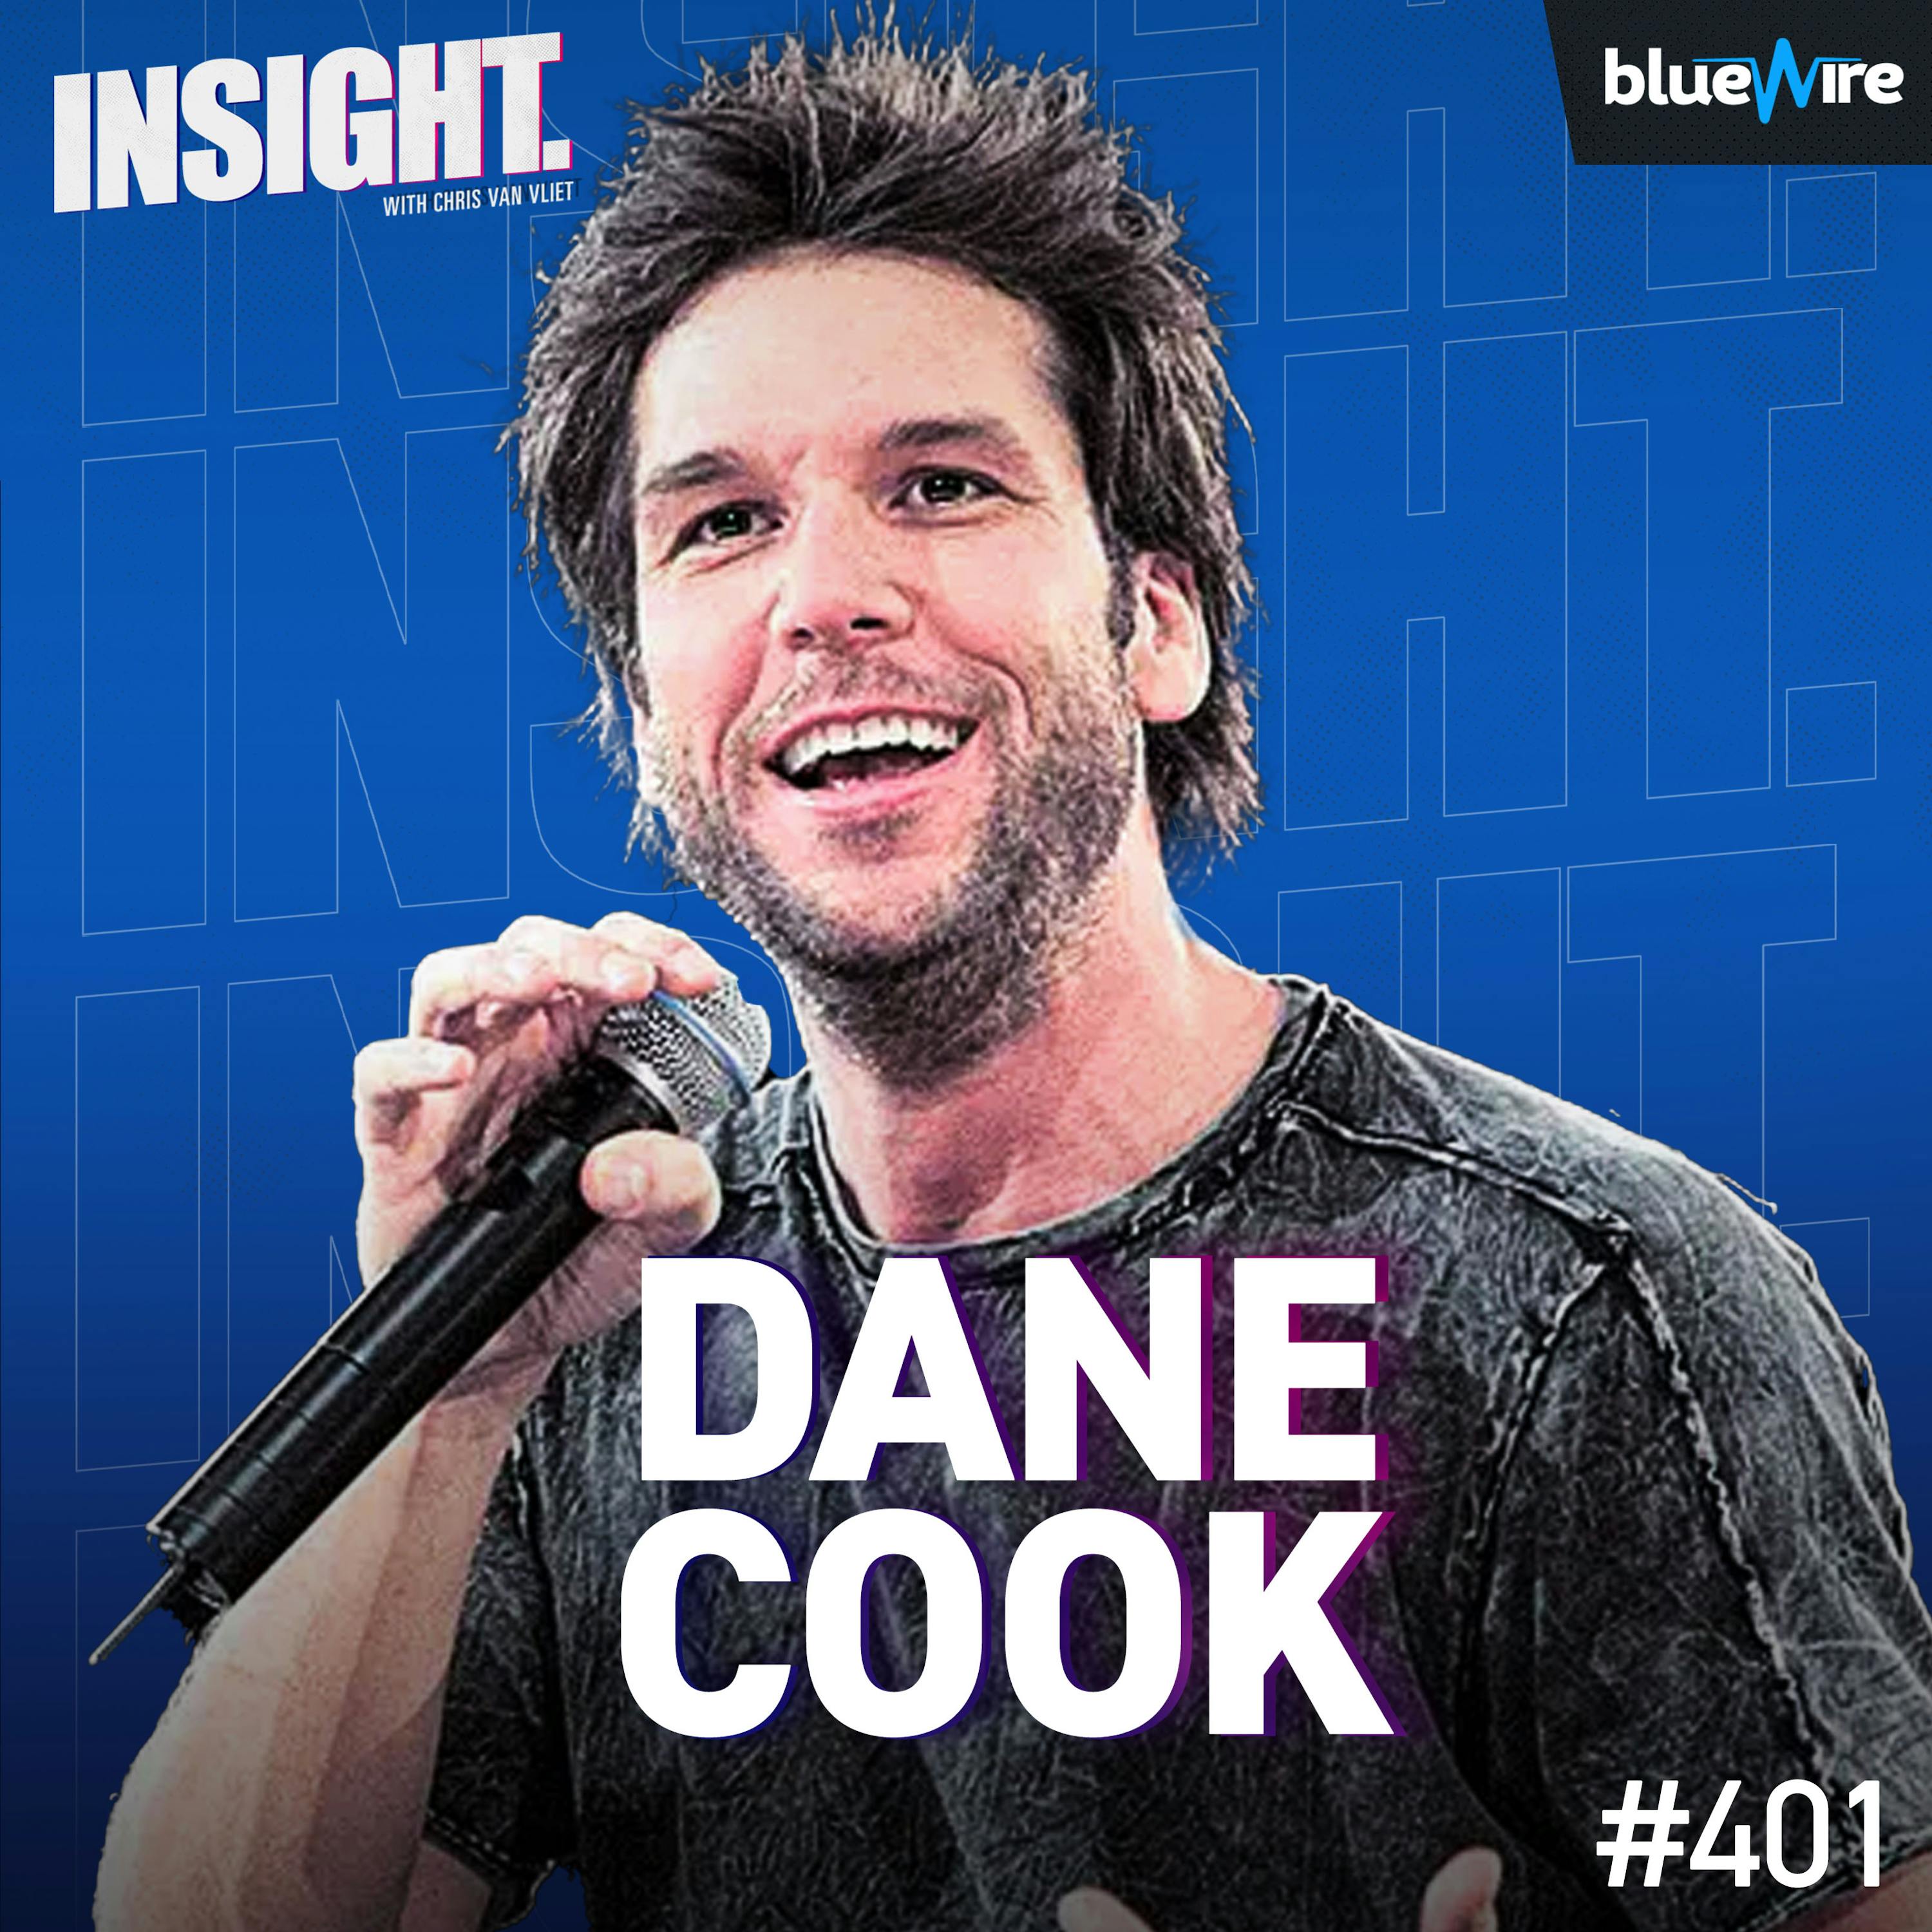 Dane Cook On Dealing With Hate, Dave Chappelle, His New Special "Above It All" Image